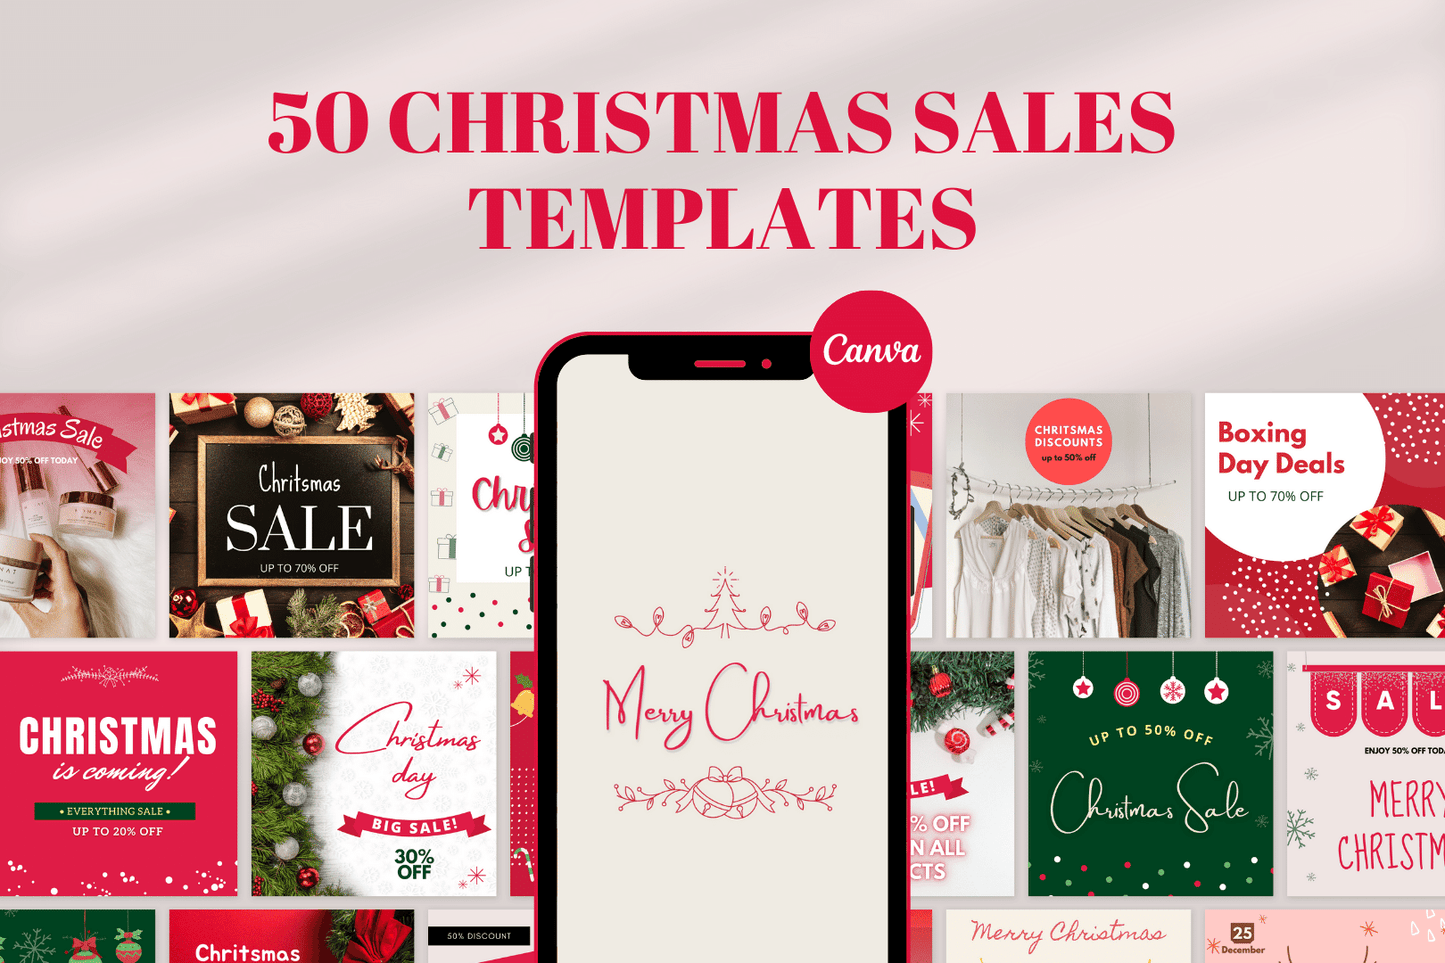 50 Christmas Sales Templates For Instagram